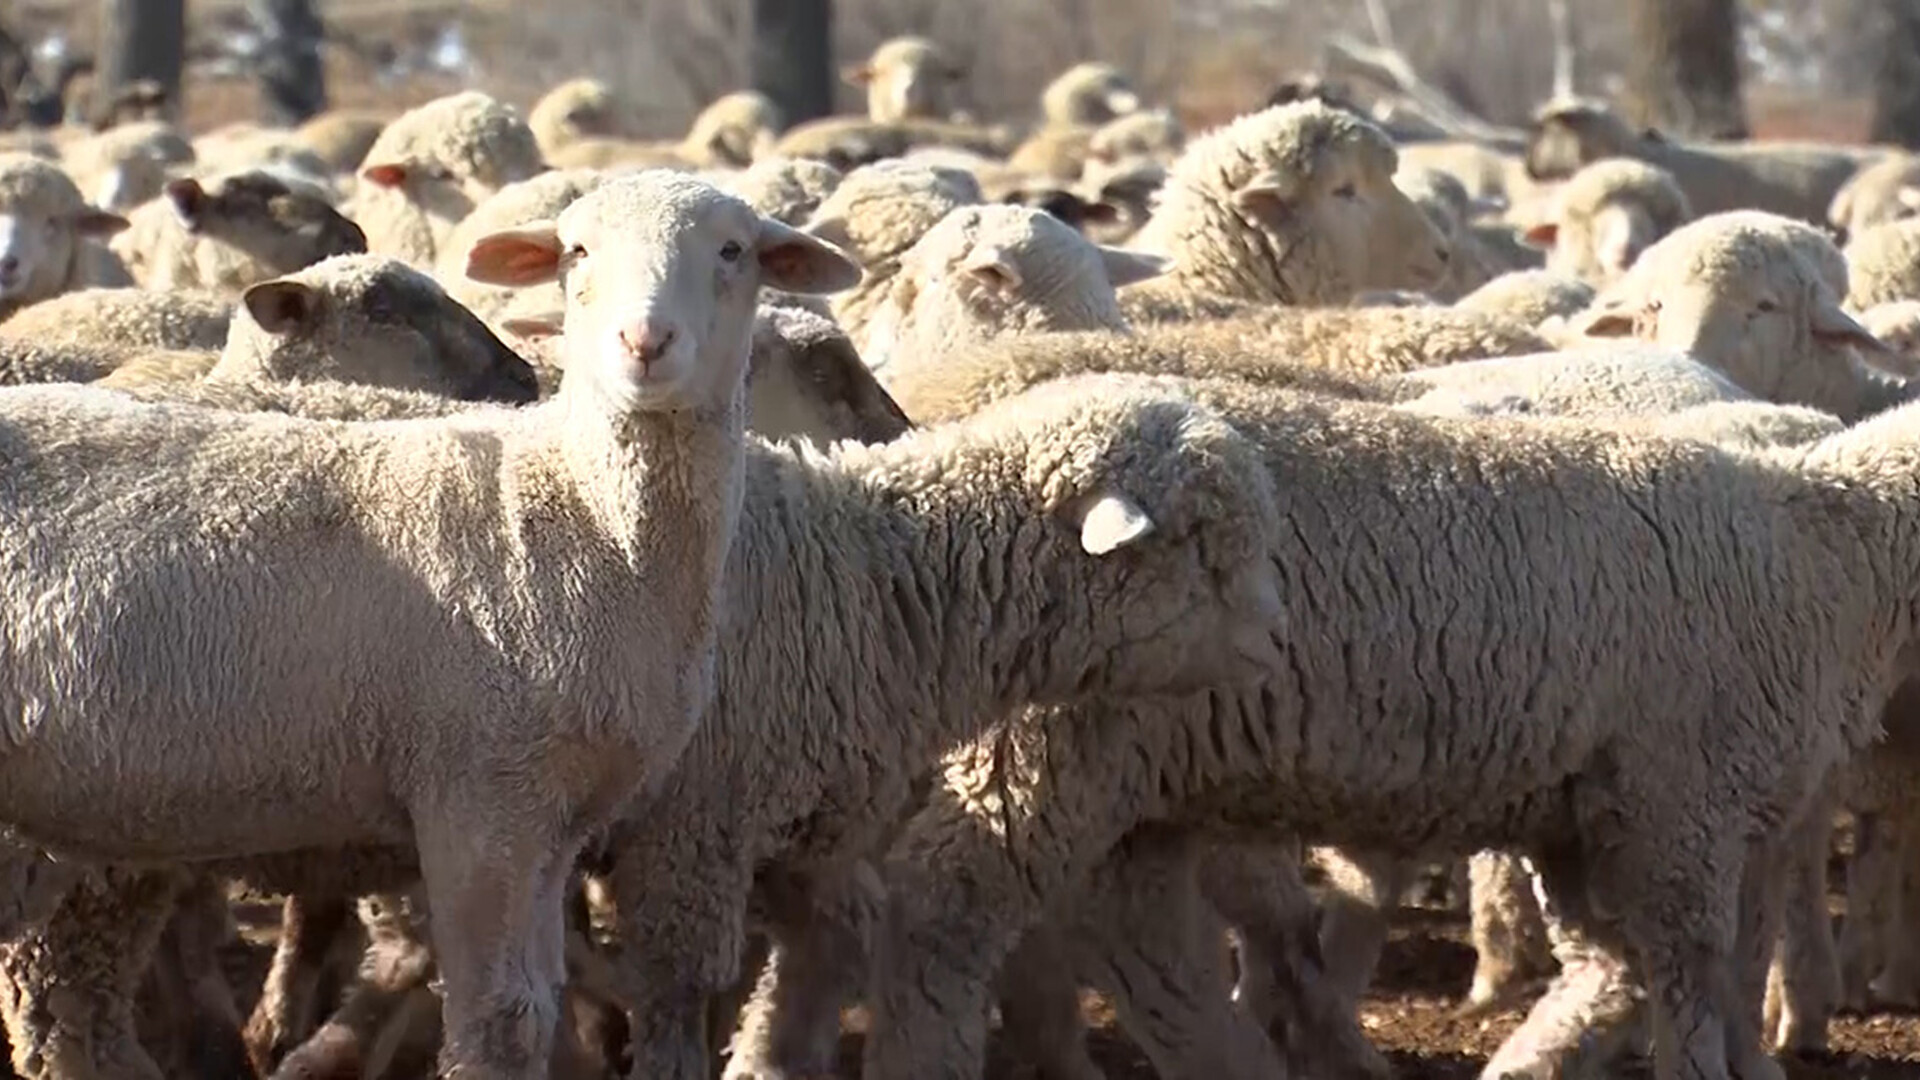 Sheep Producers in Colorado for ASI Annual Convention